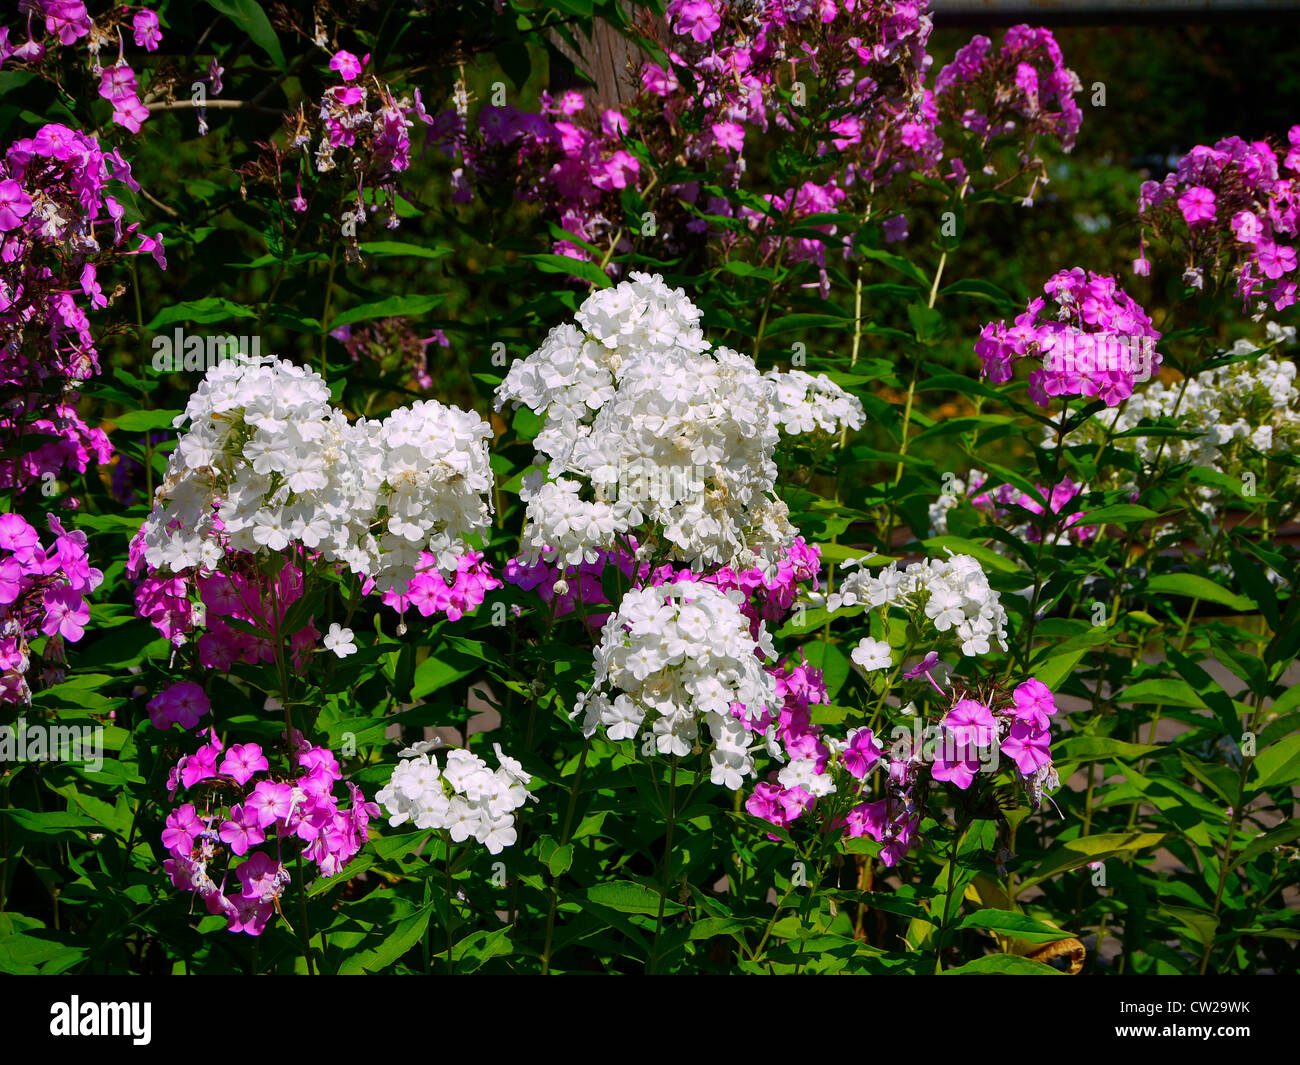 Garden of pink and white impatiens Stock Photo